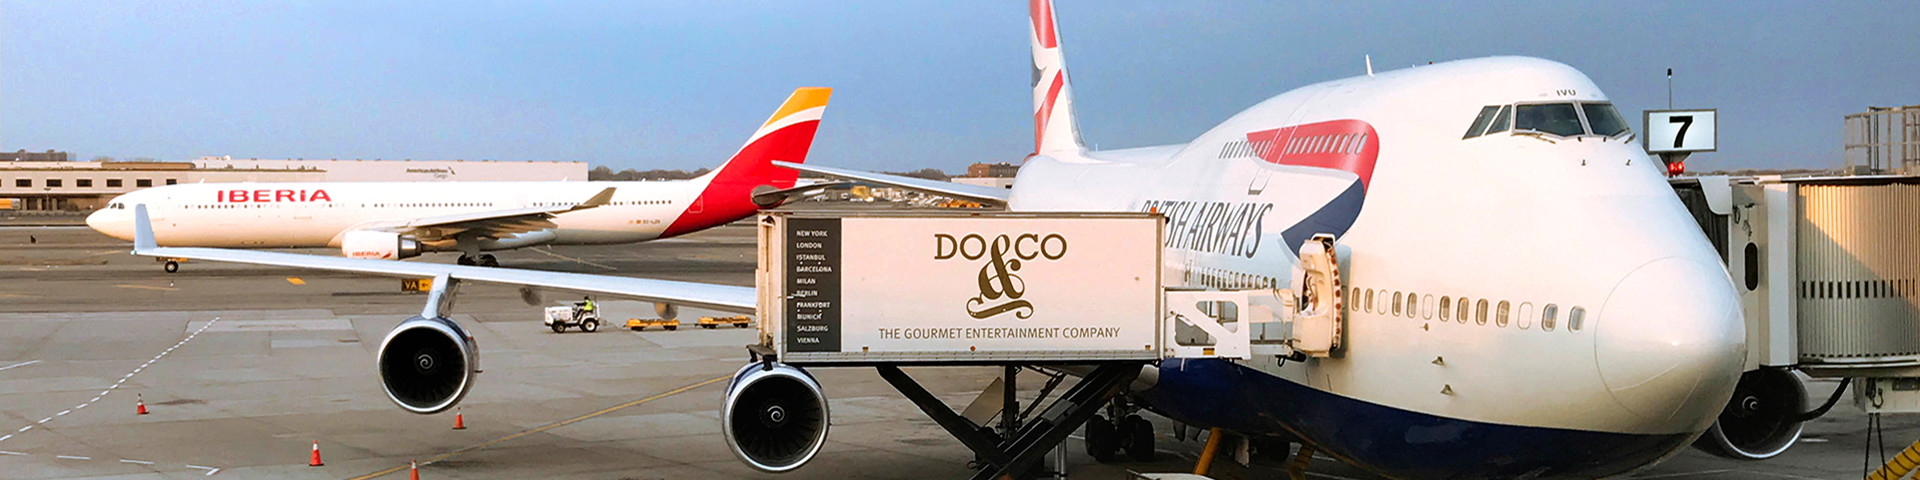 DO & CO Airline Catering01